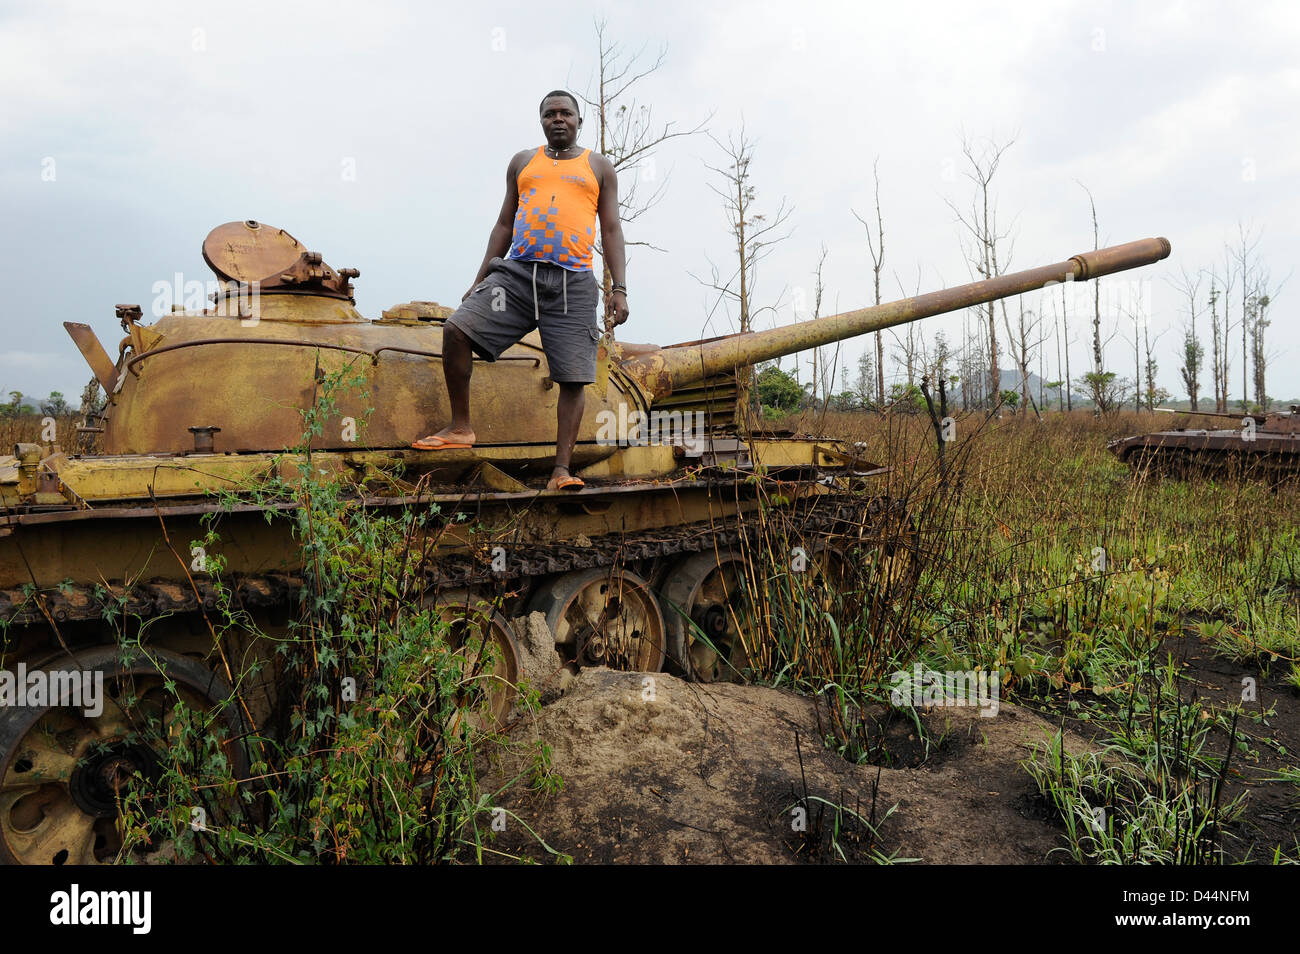 Africa ANGOLA, wreck of old soviet russian battle tank T-54 from civil war between MPLA and UNITA near Quibala, some areas have still land mines Stock Photo